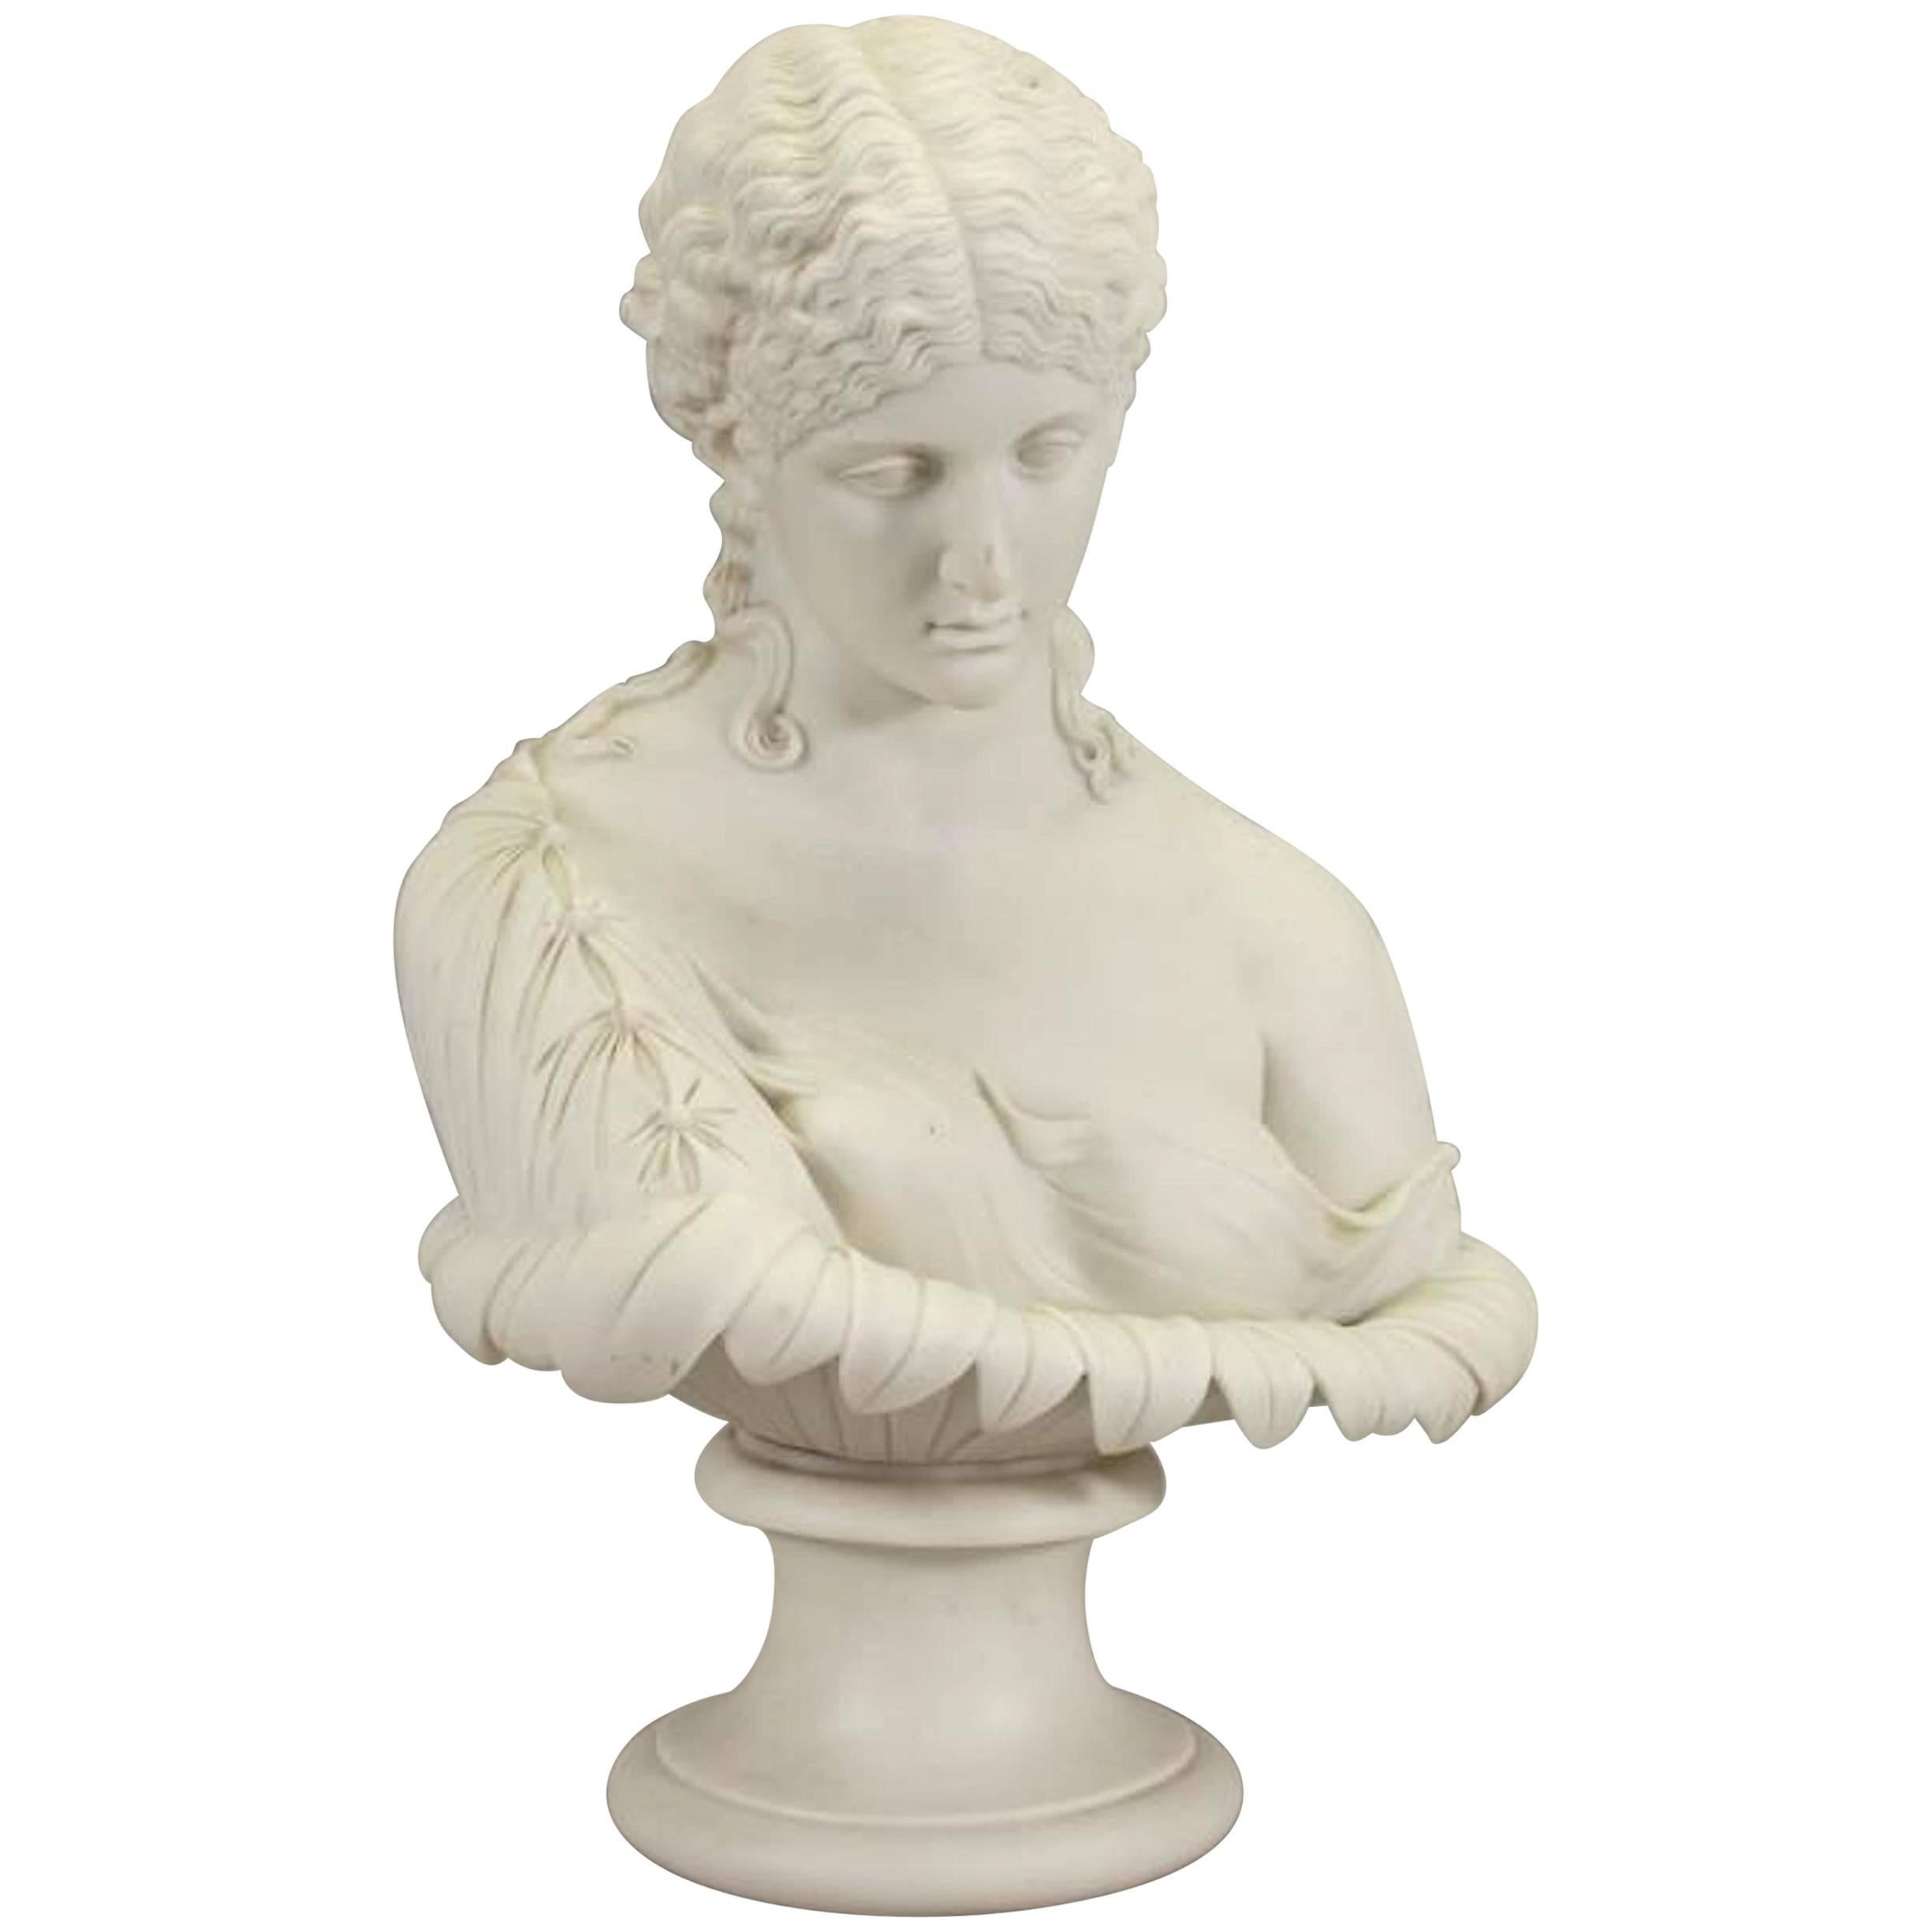 A Copeland Attributed Parian Bust of Clytie